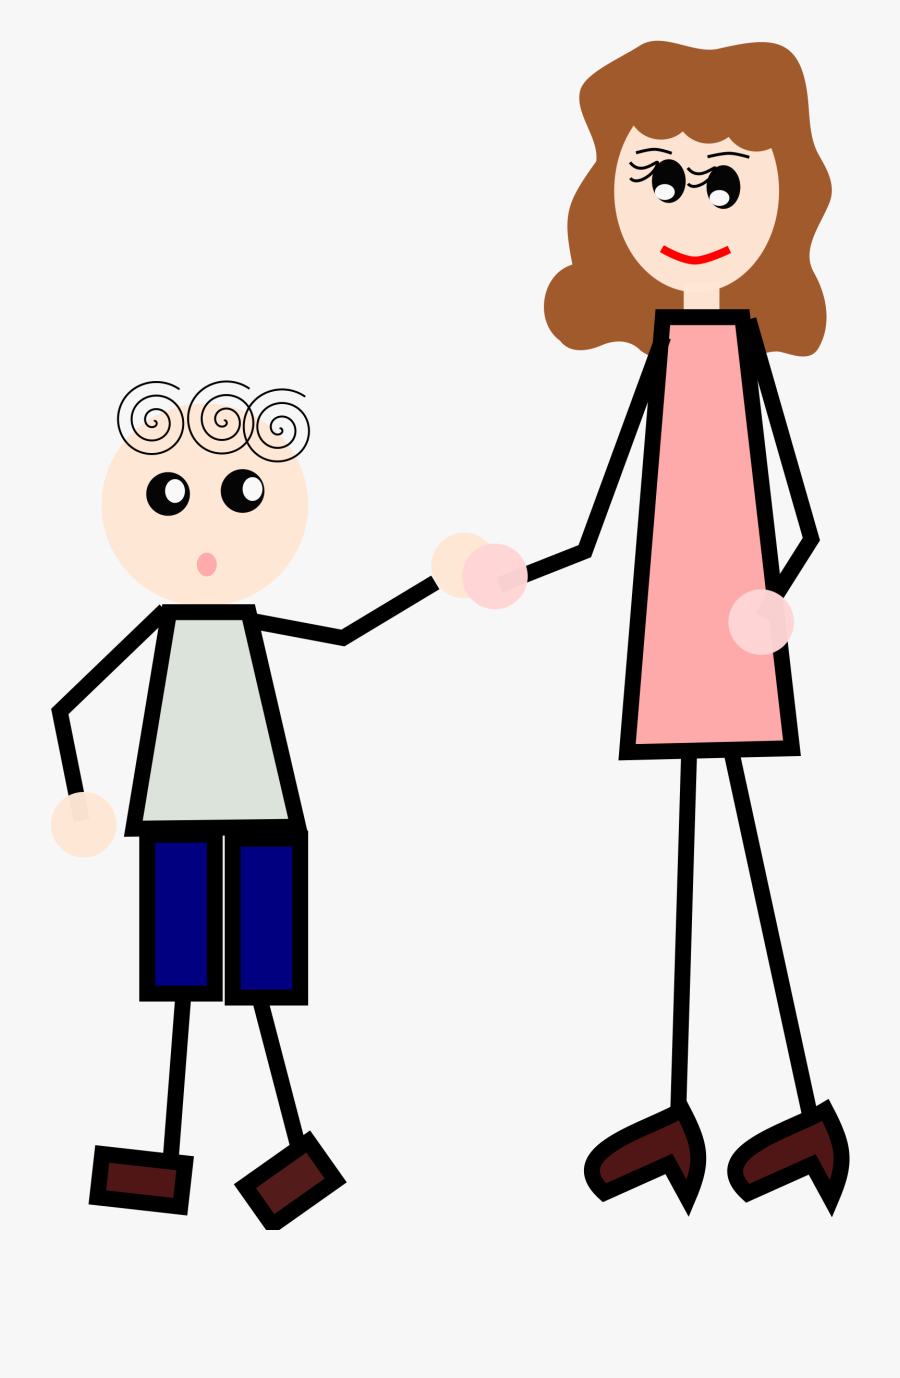 Child Mother Holding Hands Boy - Free Stick Figure Holding Hands Clipart, Transparent Clipart